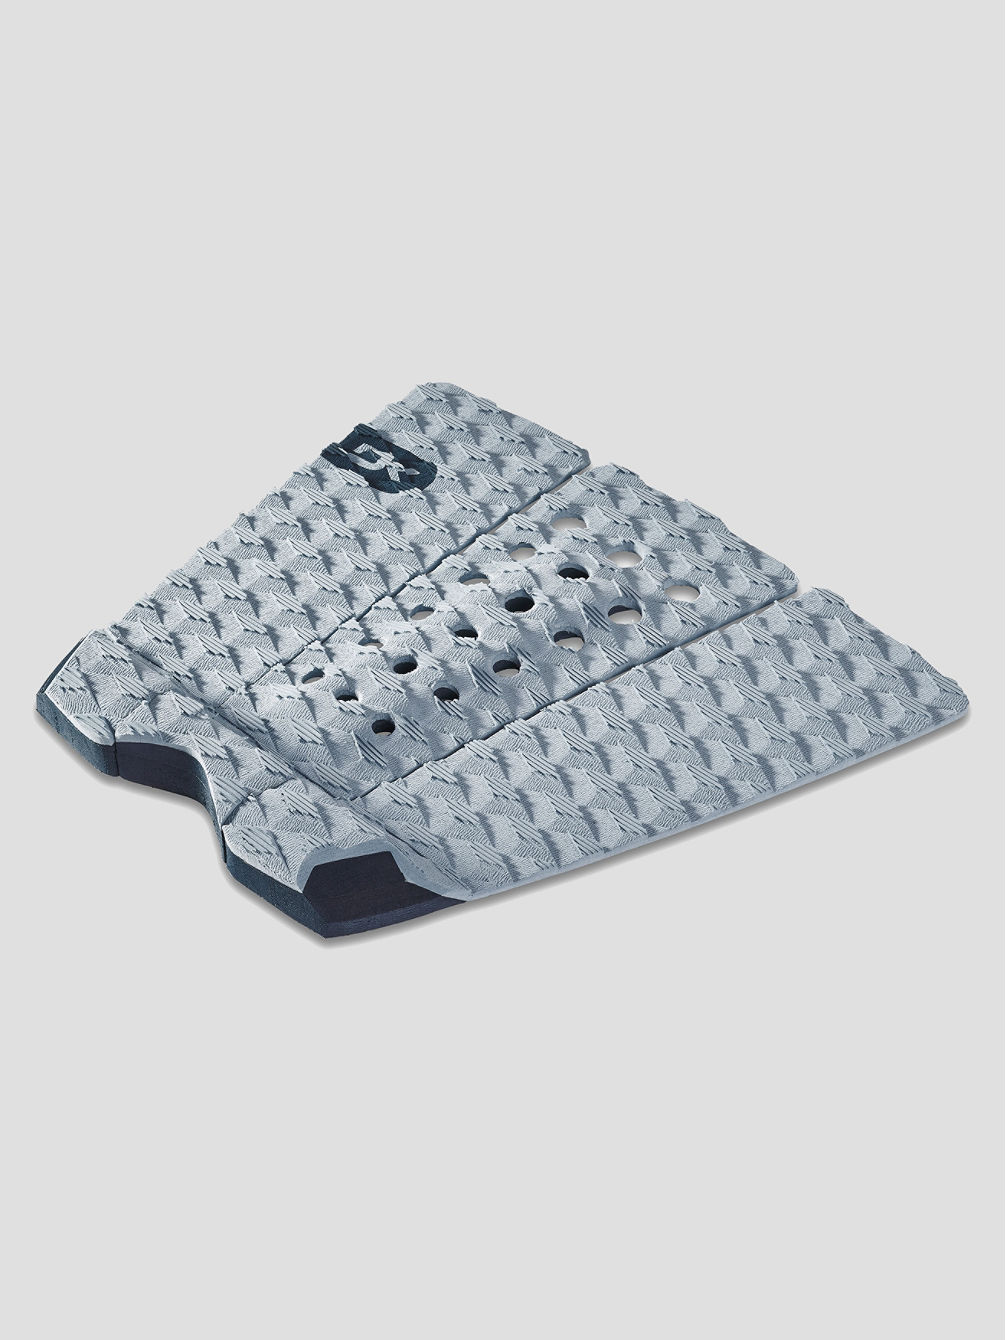 Albee Layer Pro Traction Tailpad